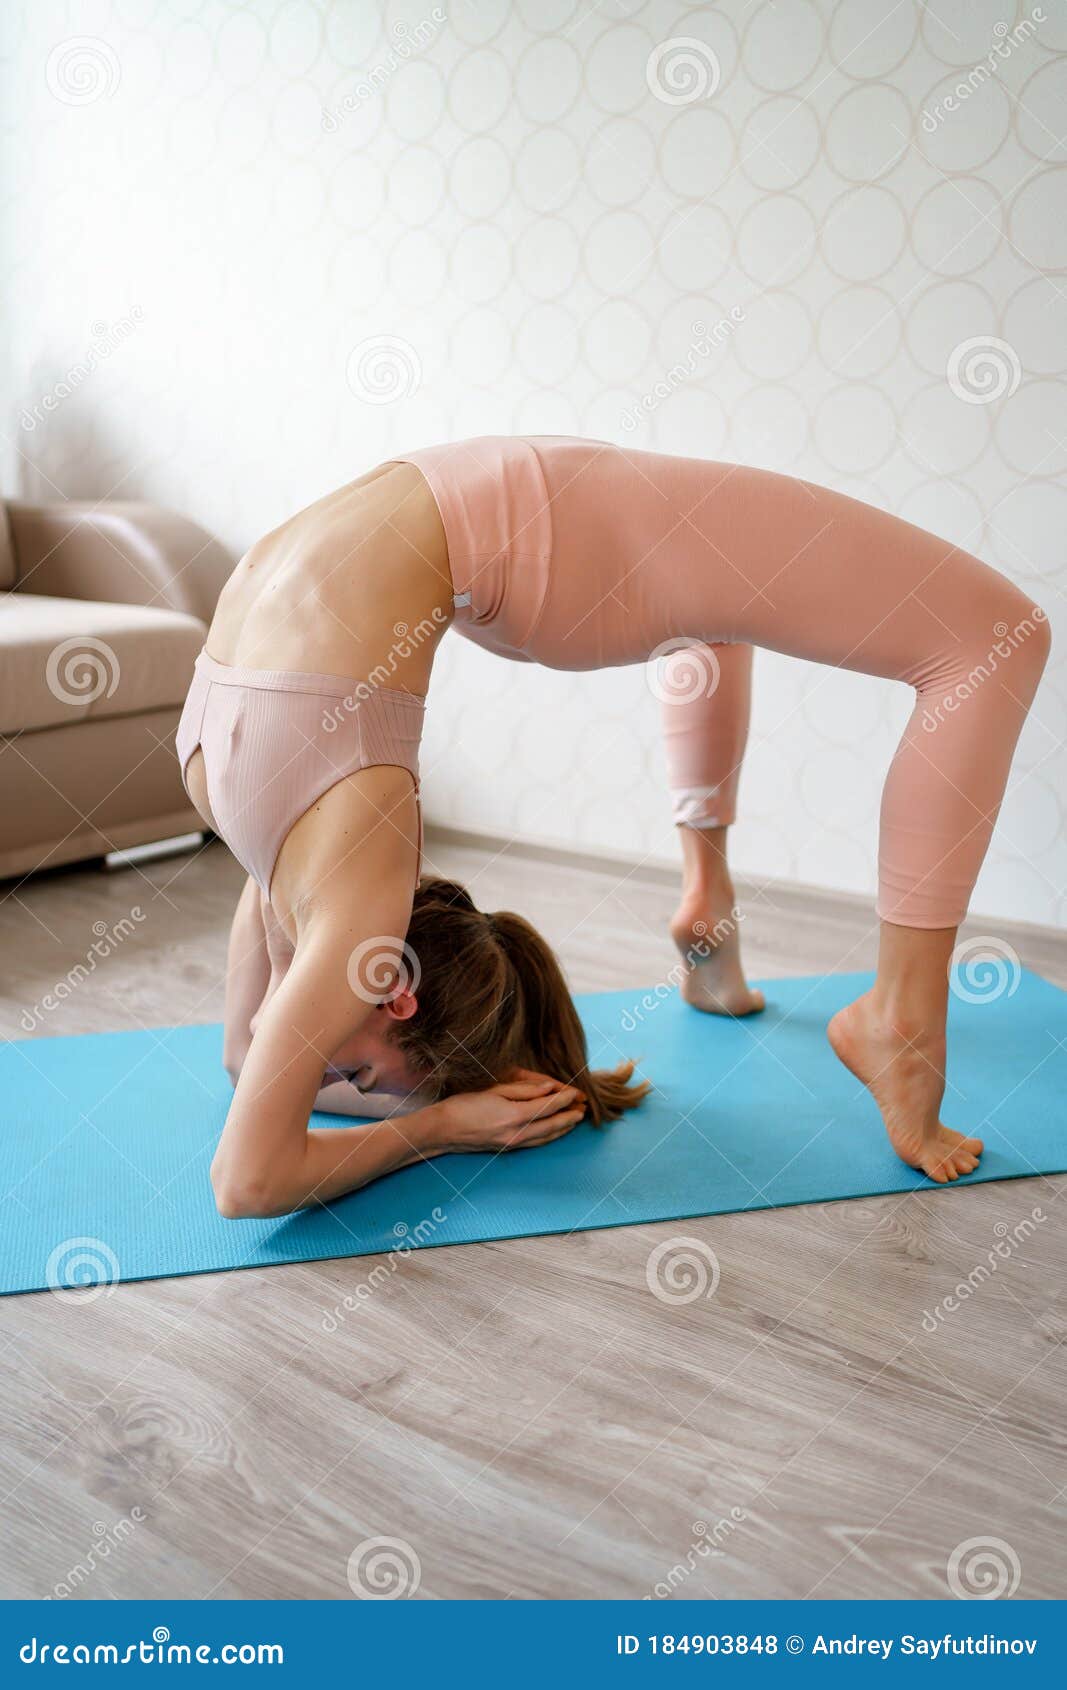 Girl with Beautiful Athletic Body Does Yoga Exercises at Home. Pilates,  Fitness Stock Photo - Image of athletic, flexibility: 184903848